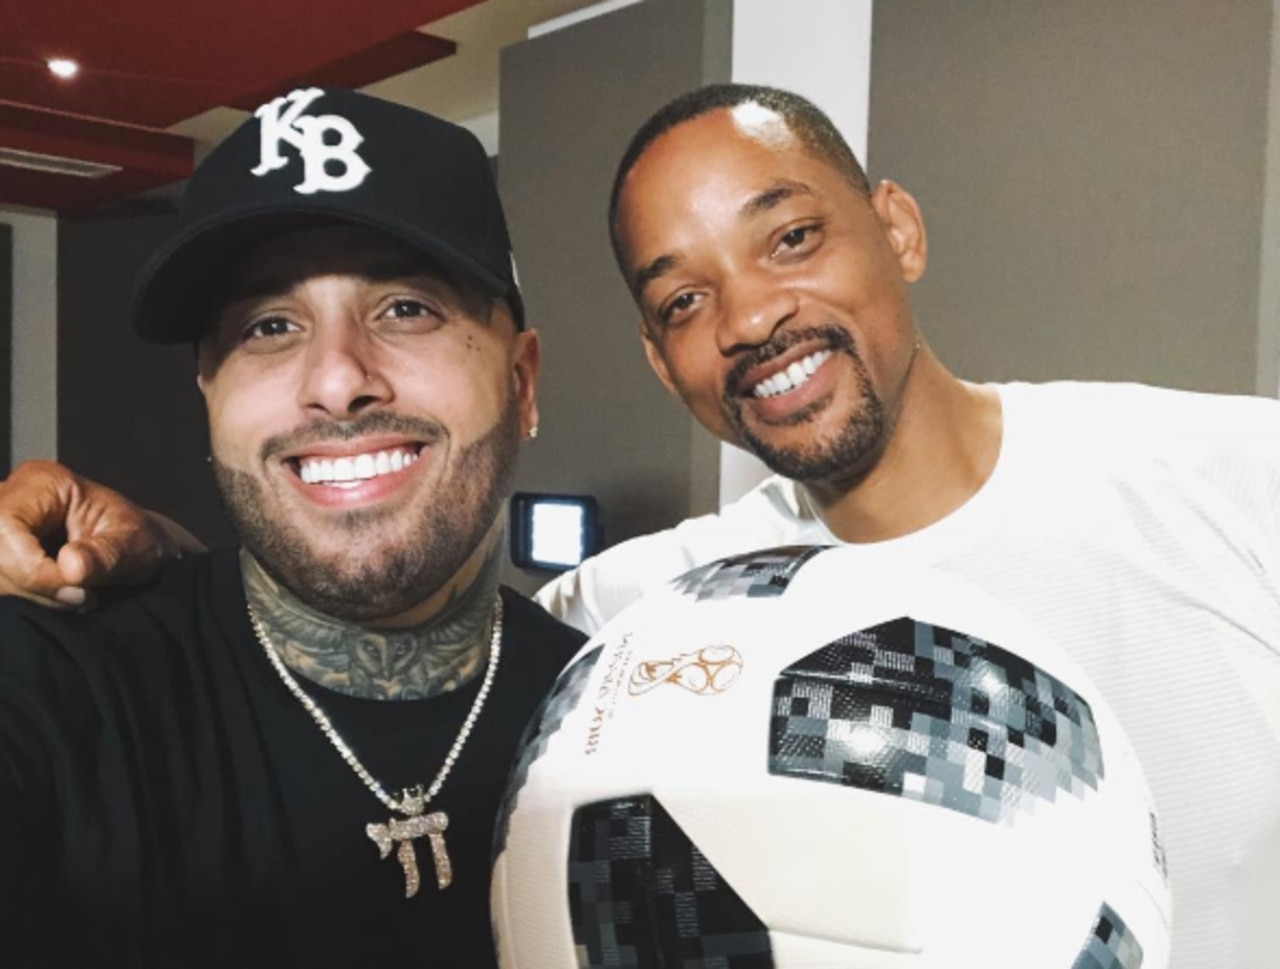 Will Smith and Nicky Jam have teamed up on the official song of the 2018 World Cup